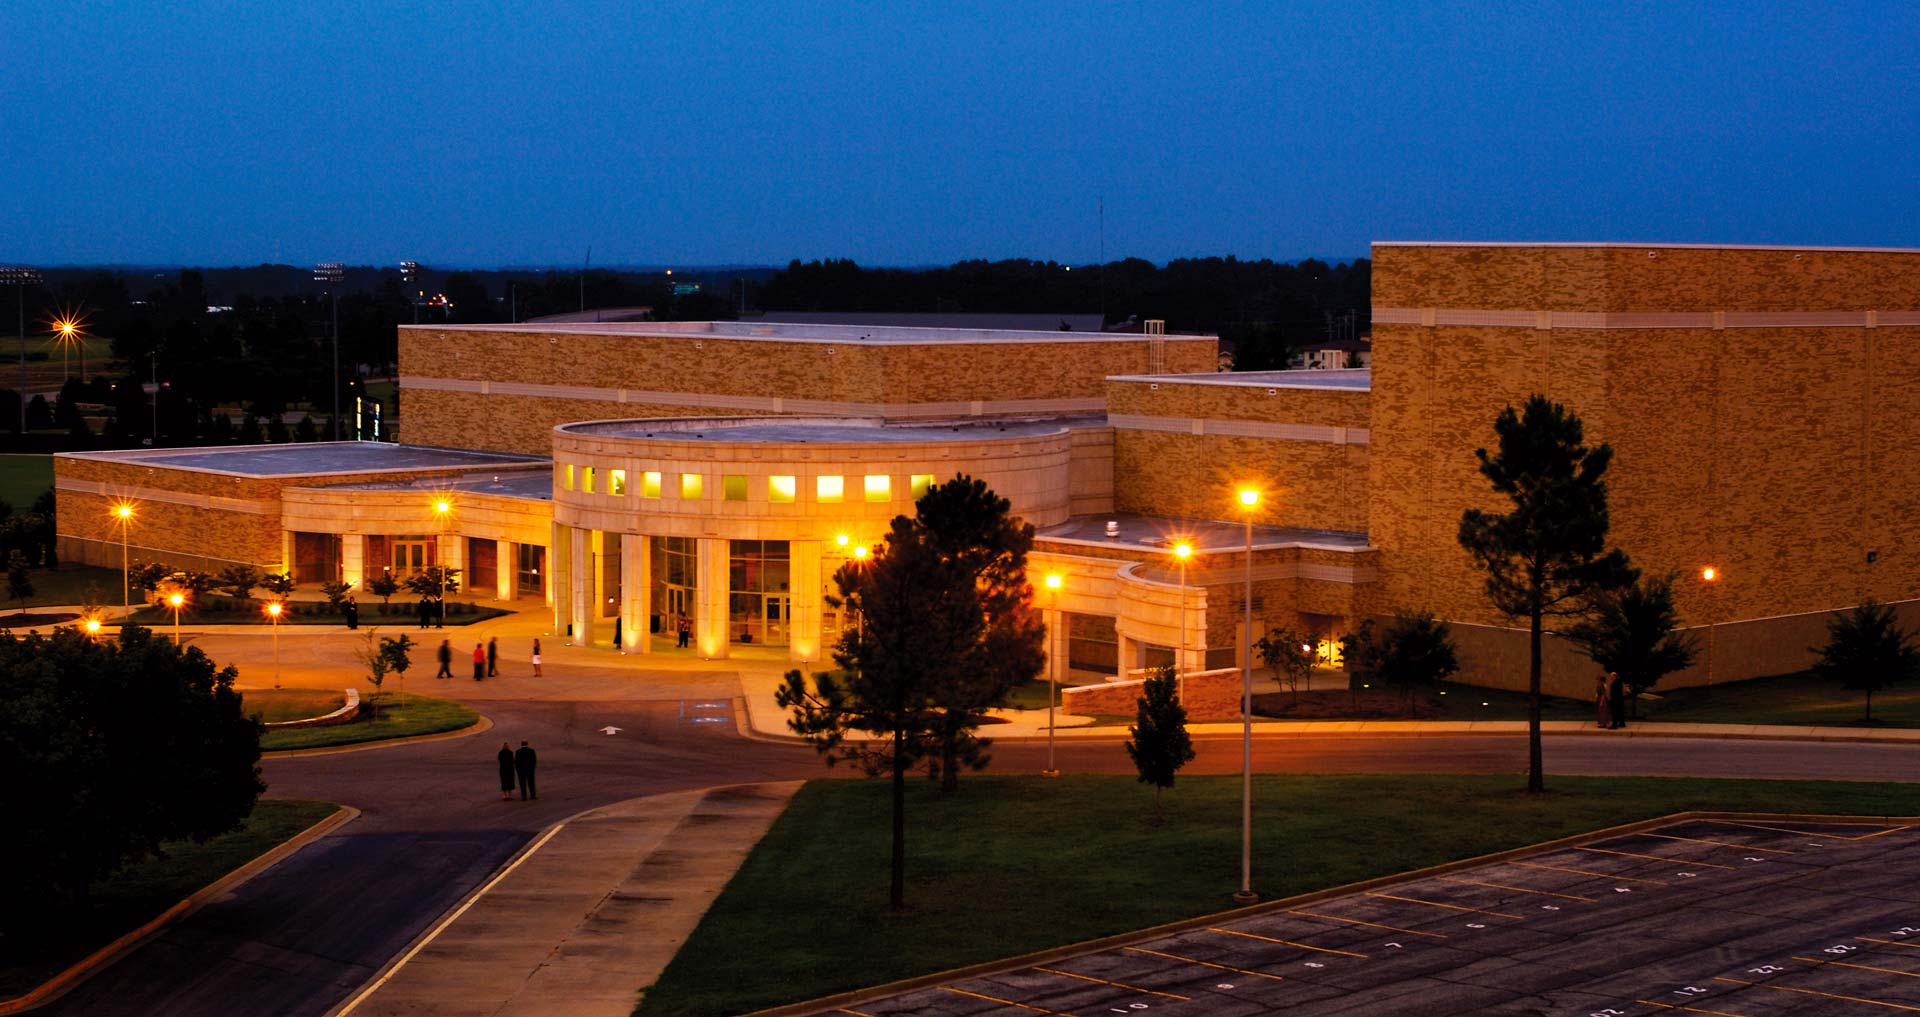 The Fowler Center at night